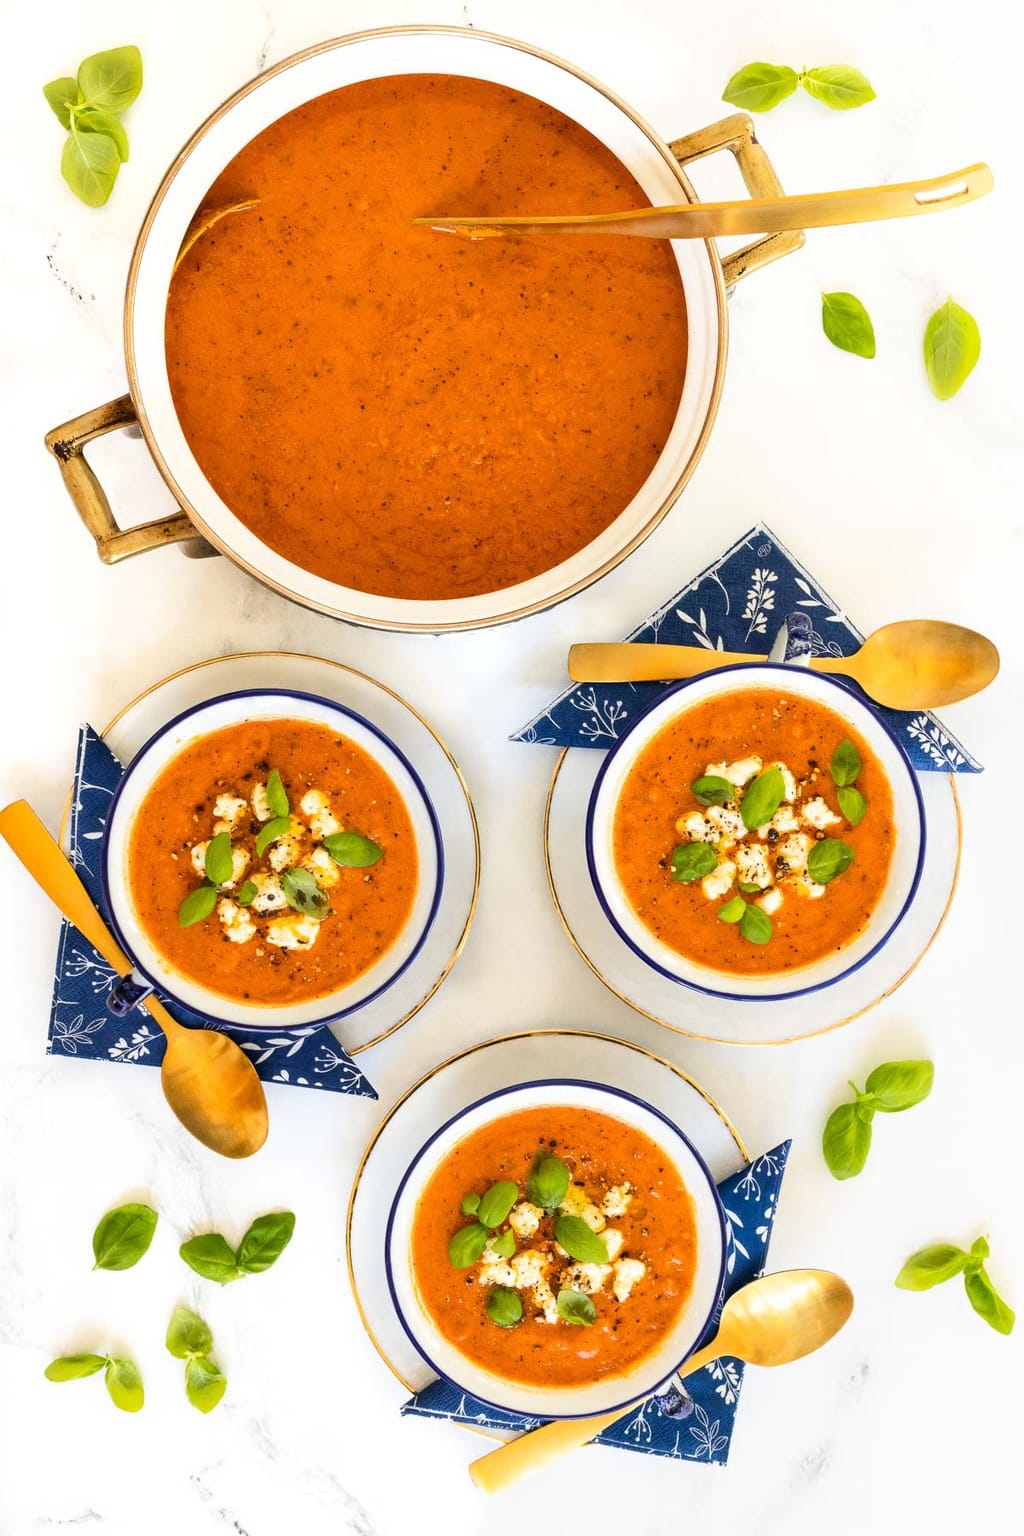 Vertical overhead photo of bowls and a pot of Tomato Basil White Bean Soup surrounded by and garnished with fresh basil leaves.